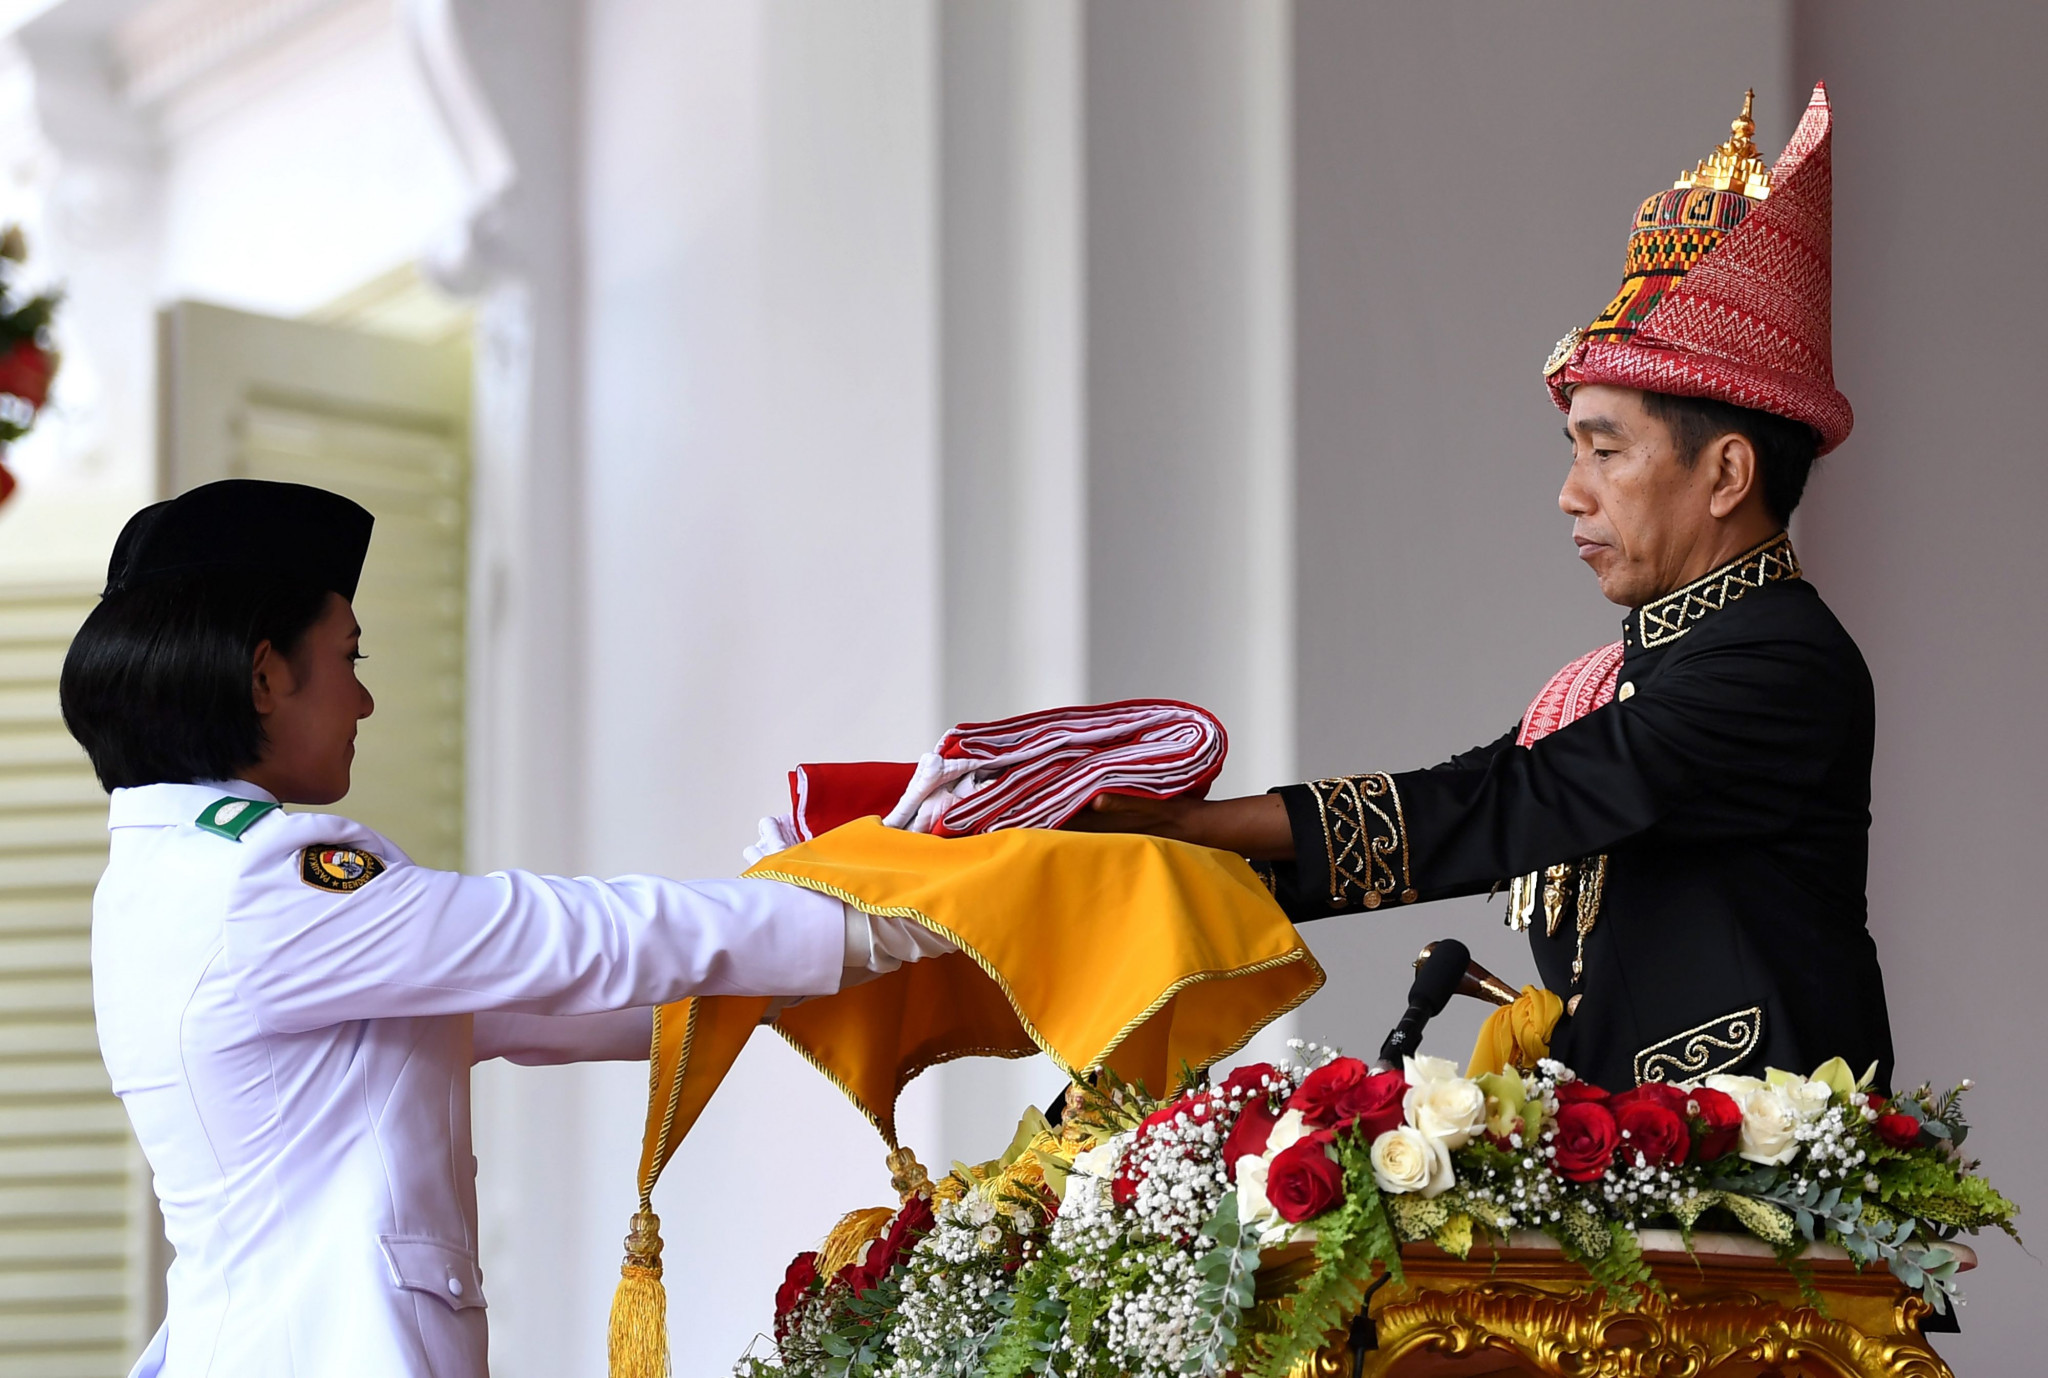 Widodo had earlier taken part in a ceremony at Jakarta's Presidential Palace to mark Indonesia's 73rd Independence Day ©Getty Images